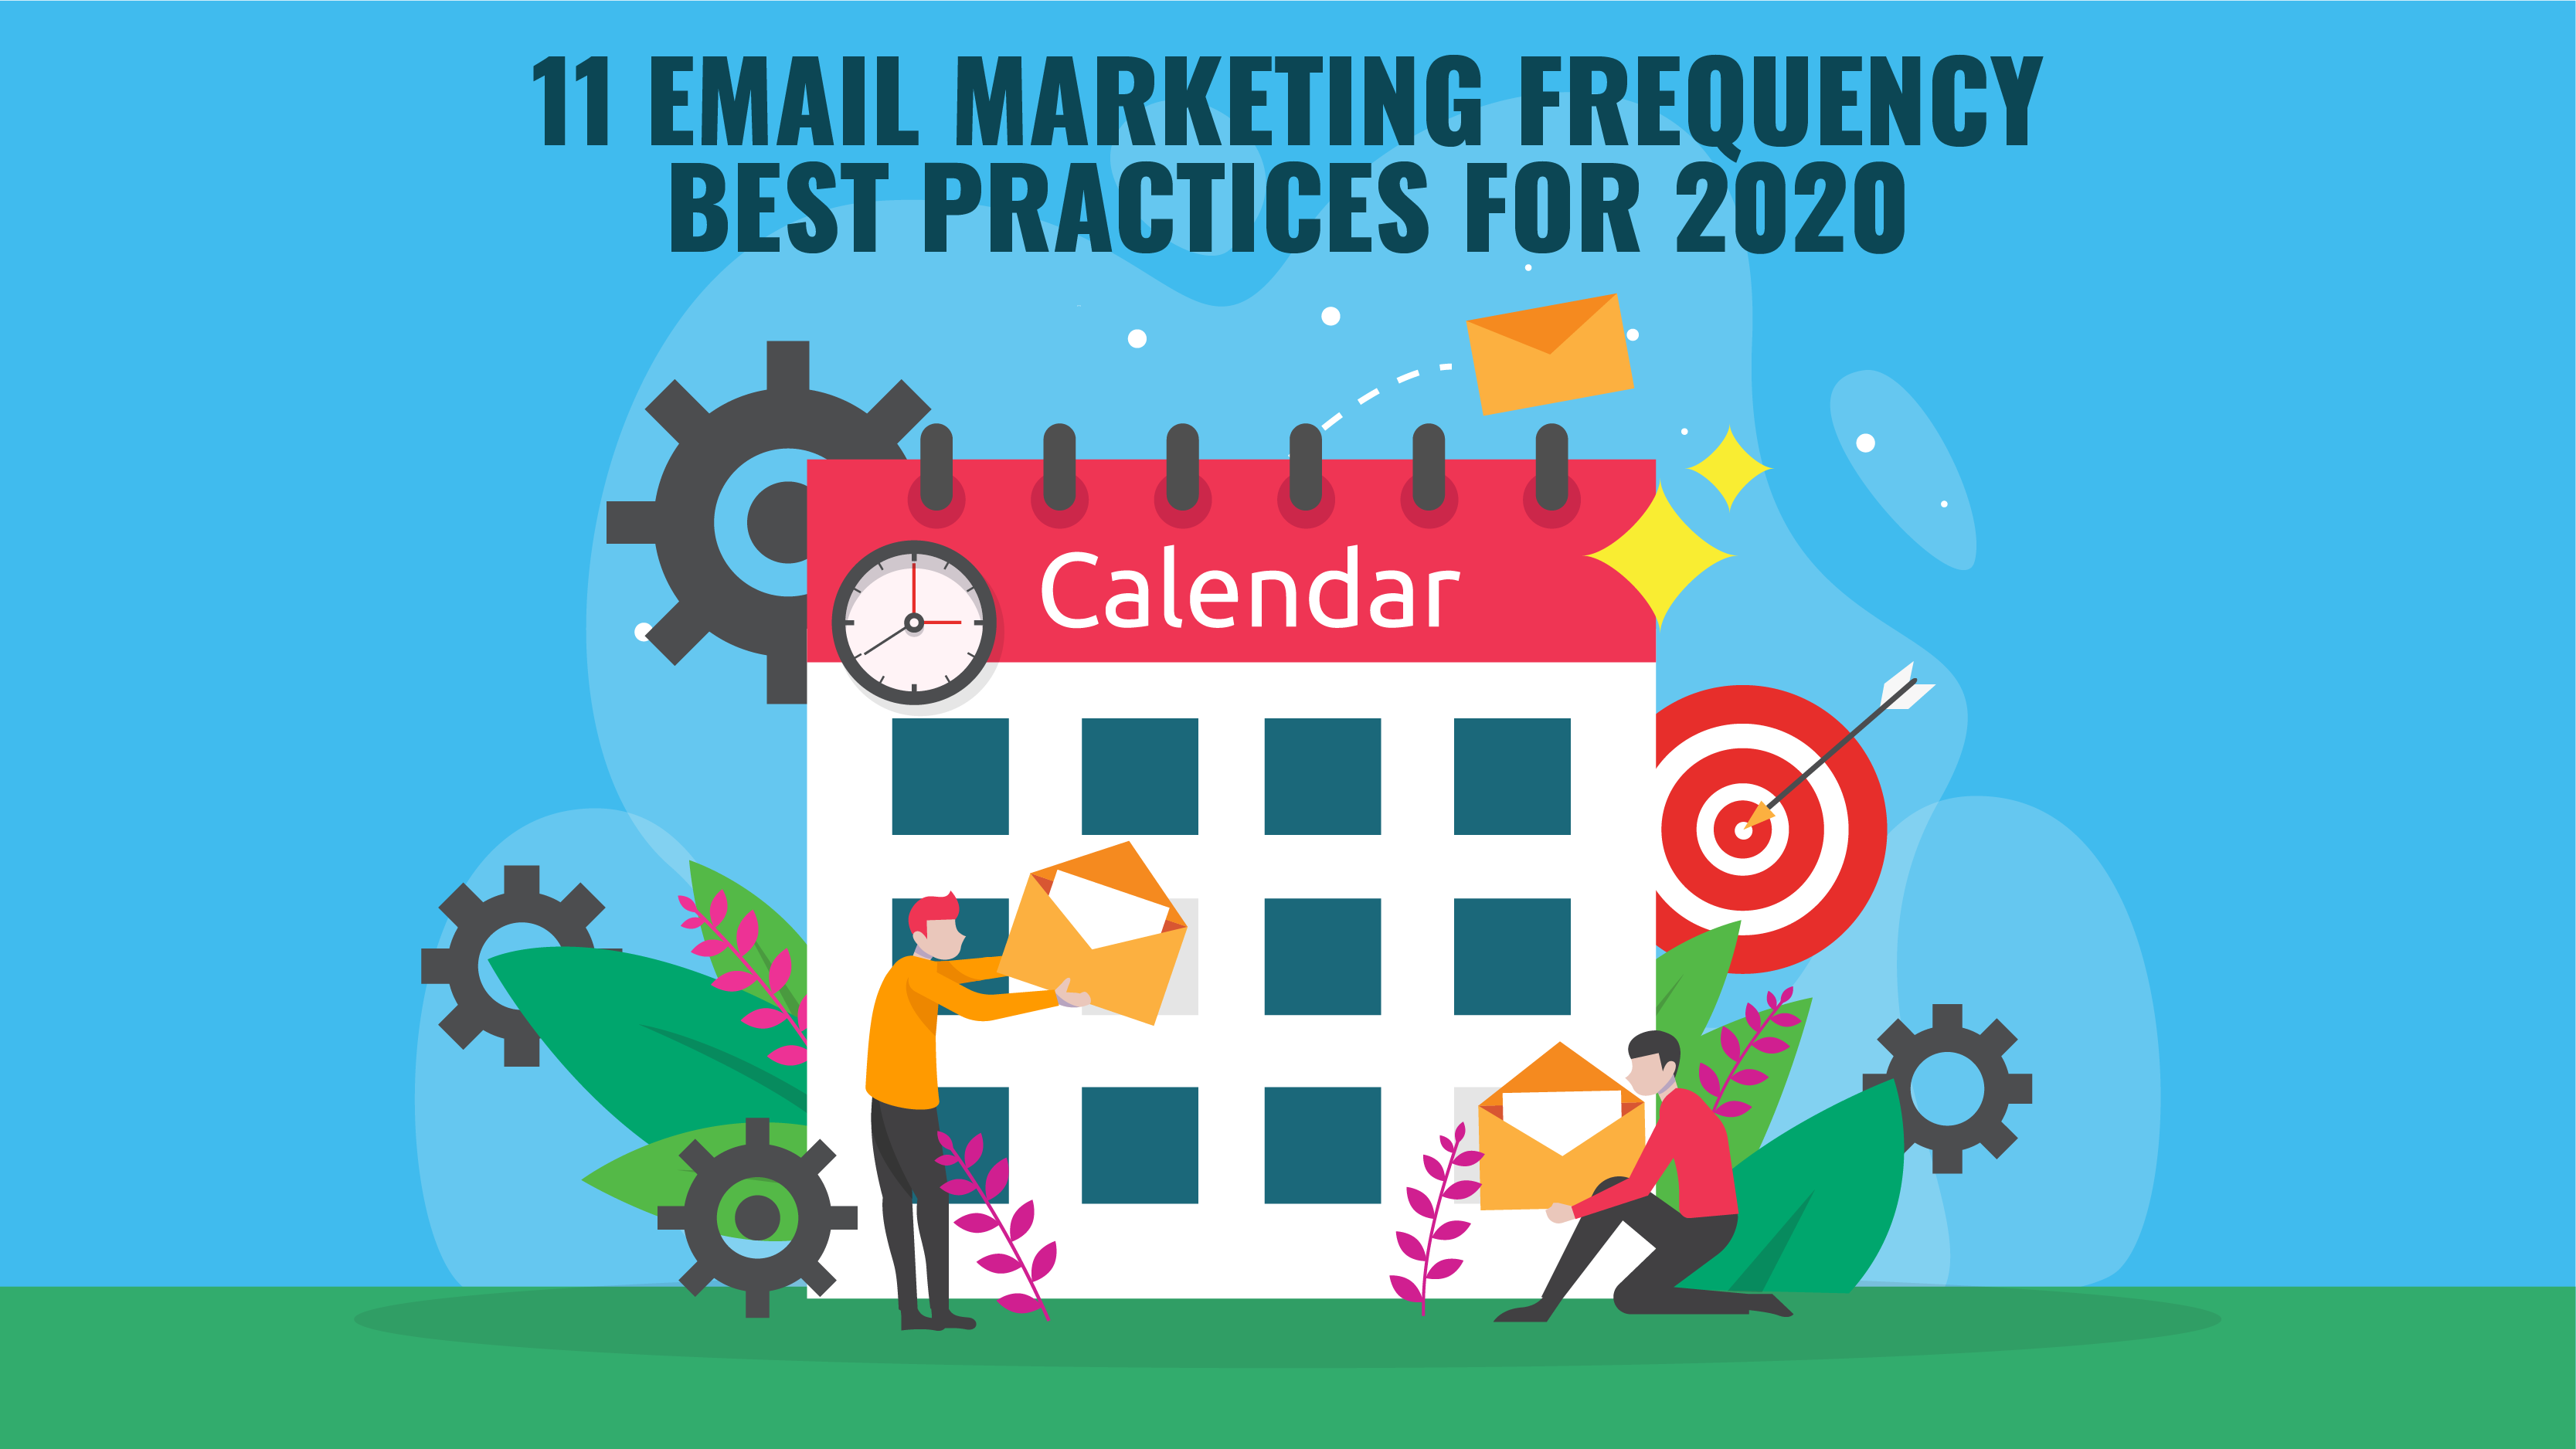 Email Marketing Best Practices 2021 11 Email Marketing Frequency Best Practices for 2020